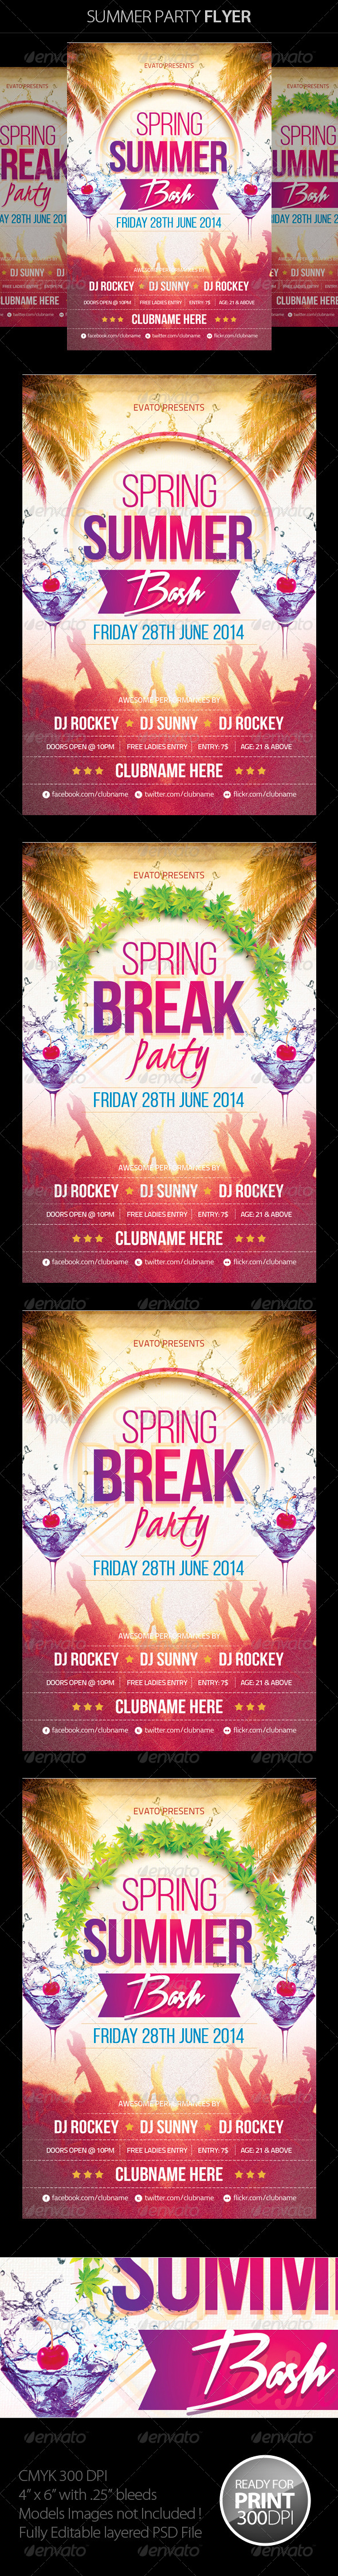 Summer / Spring Party Flyer